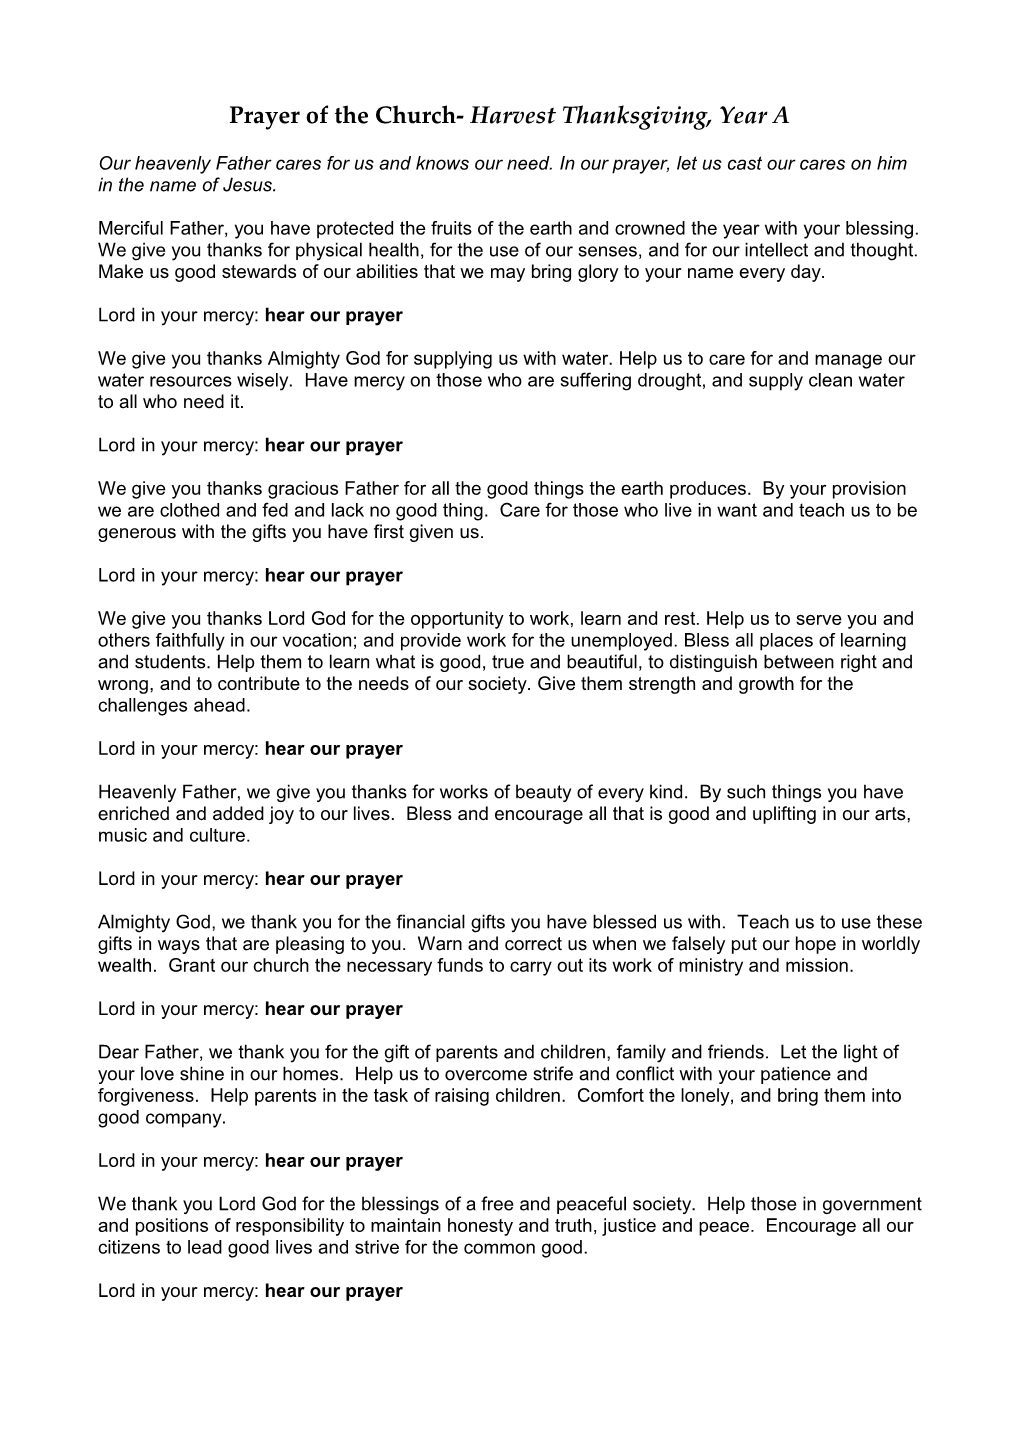 Prayer of the Church- Harvest Thanksgiving, Year A